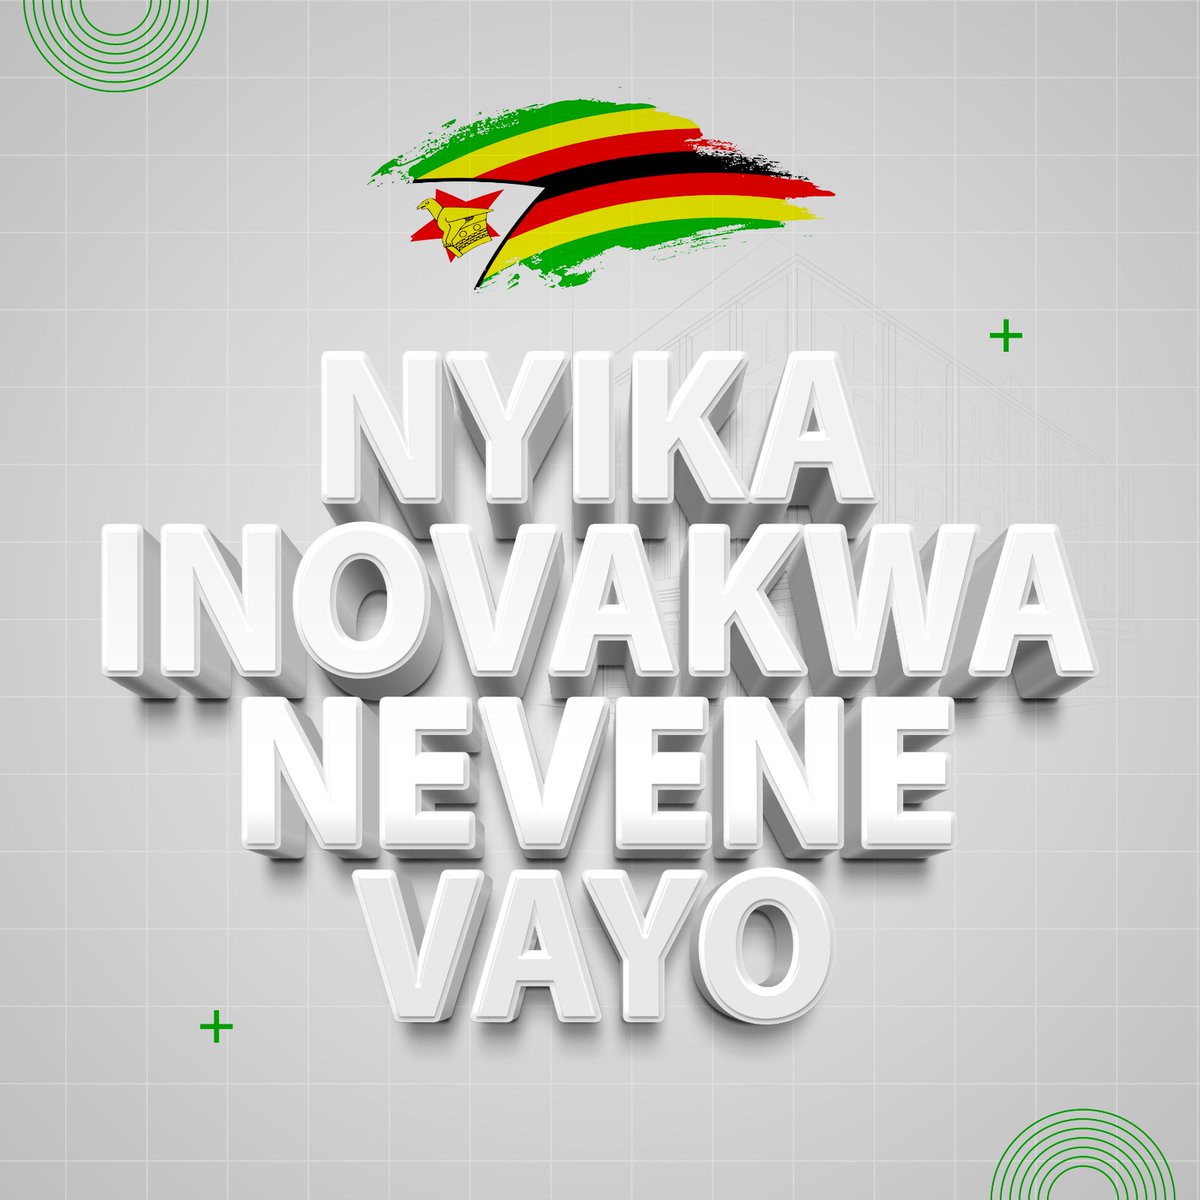 Since the birth of the Second Republic known as the New Dispensation, the Government of President ED Mnangagwa has consciously implemented a policy of leaving no one or no place behind by spreading development projects evenly across all the 10 provinces #nyikainovakwanevenevayo